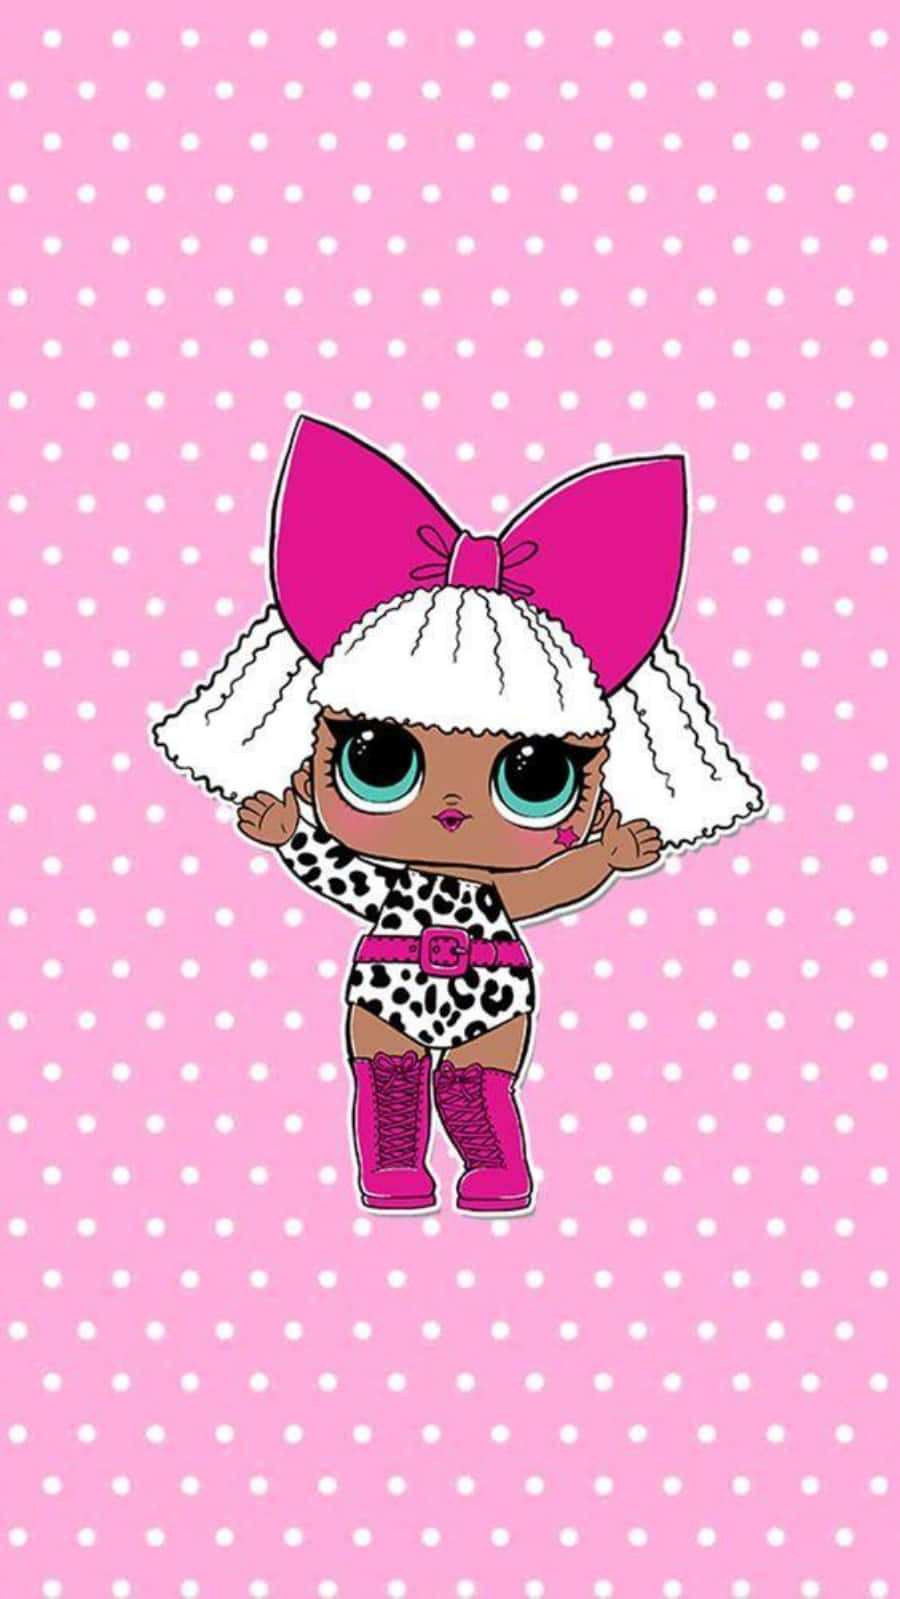 Diva On Pink Lol Dolls Pictures